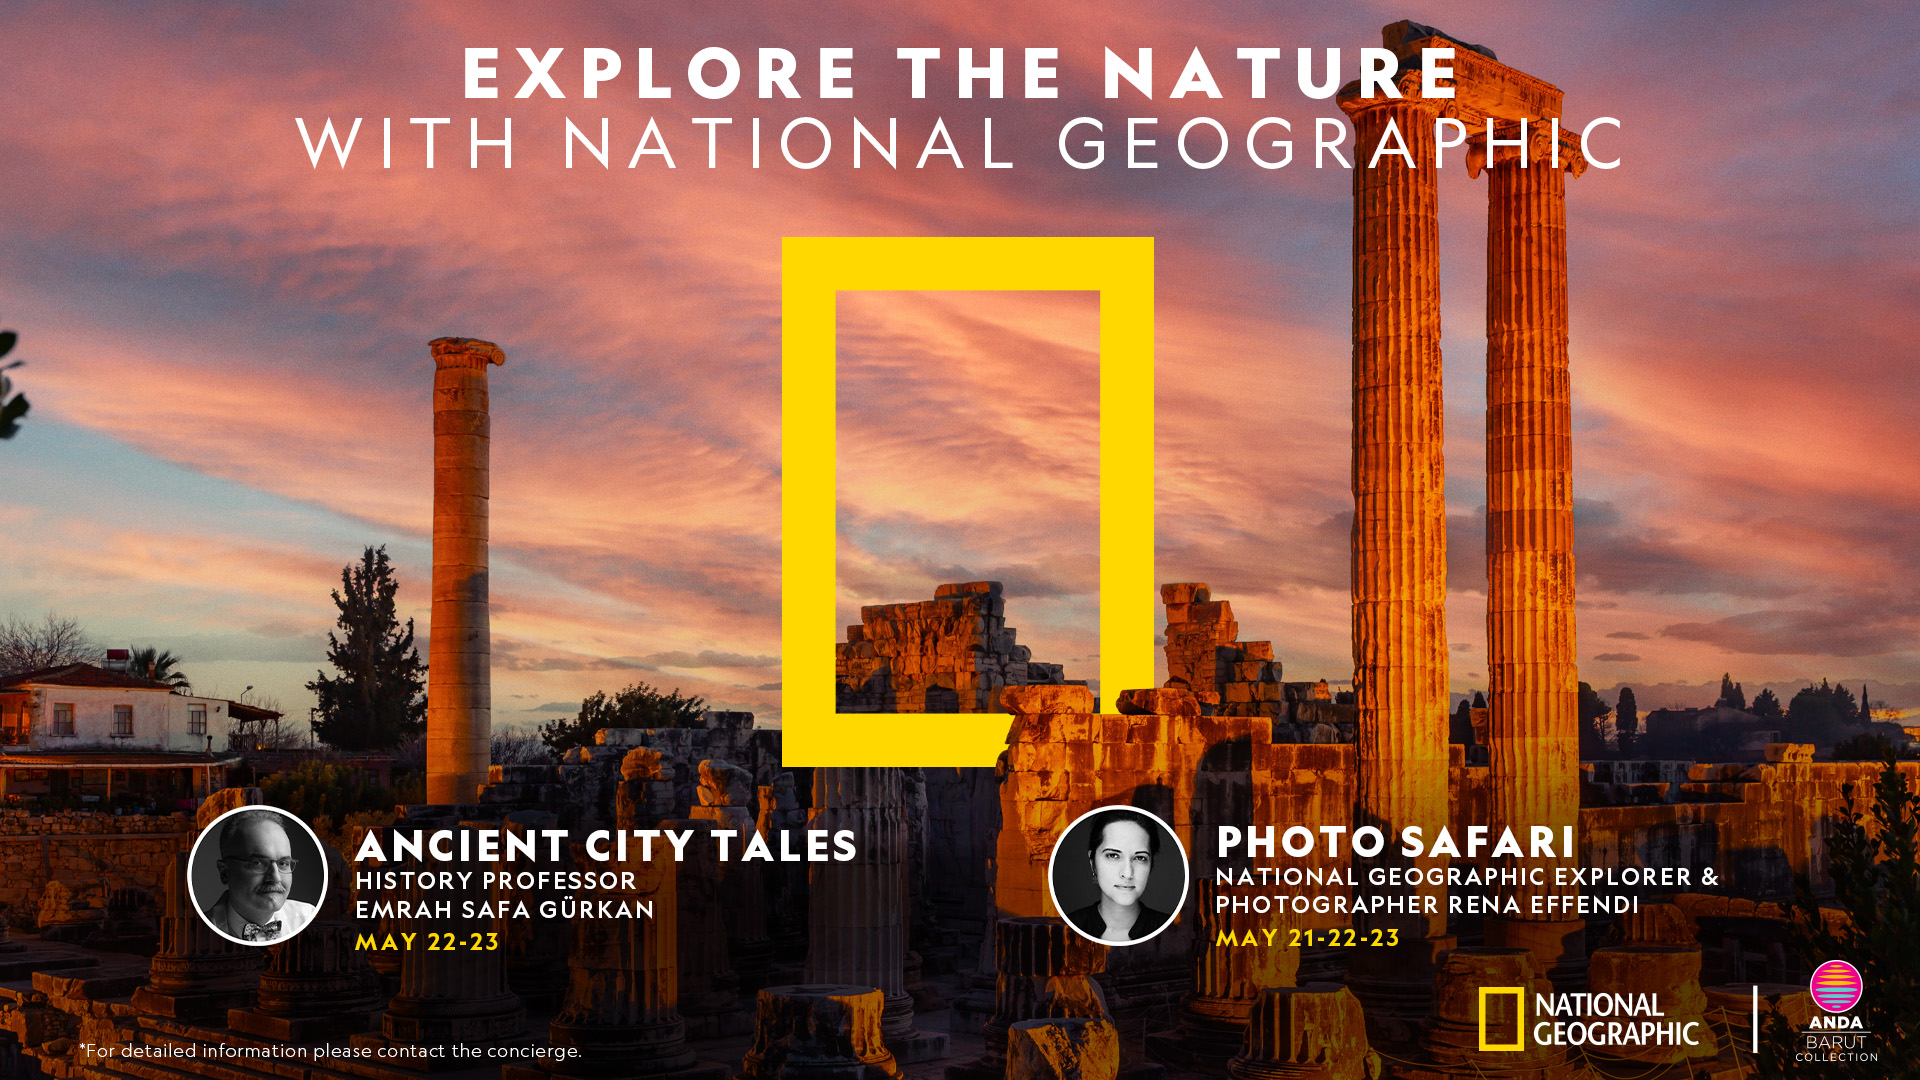 Explore Didim with National Geographic